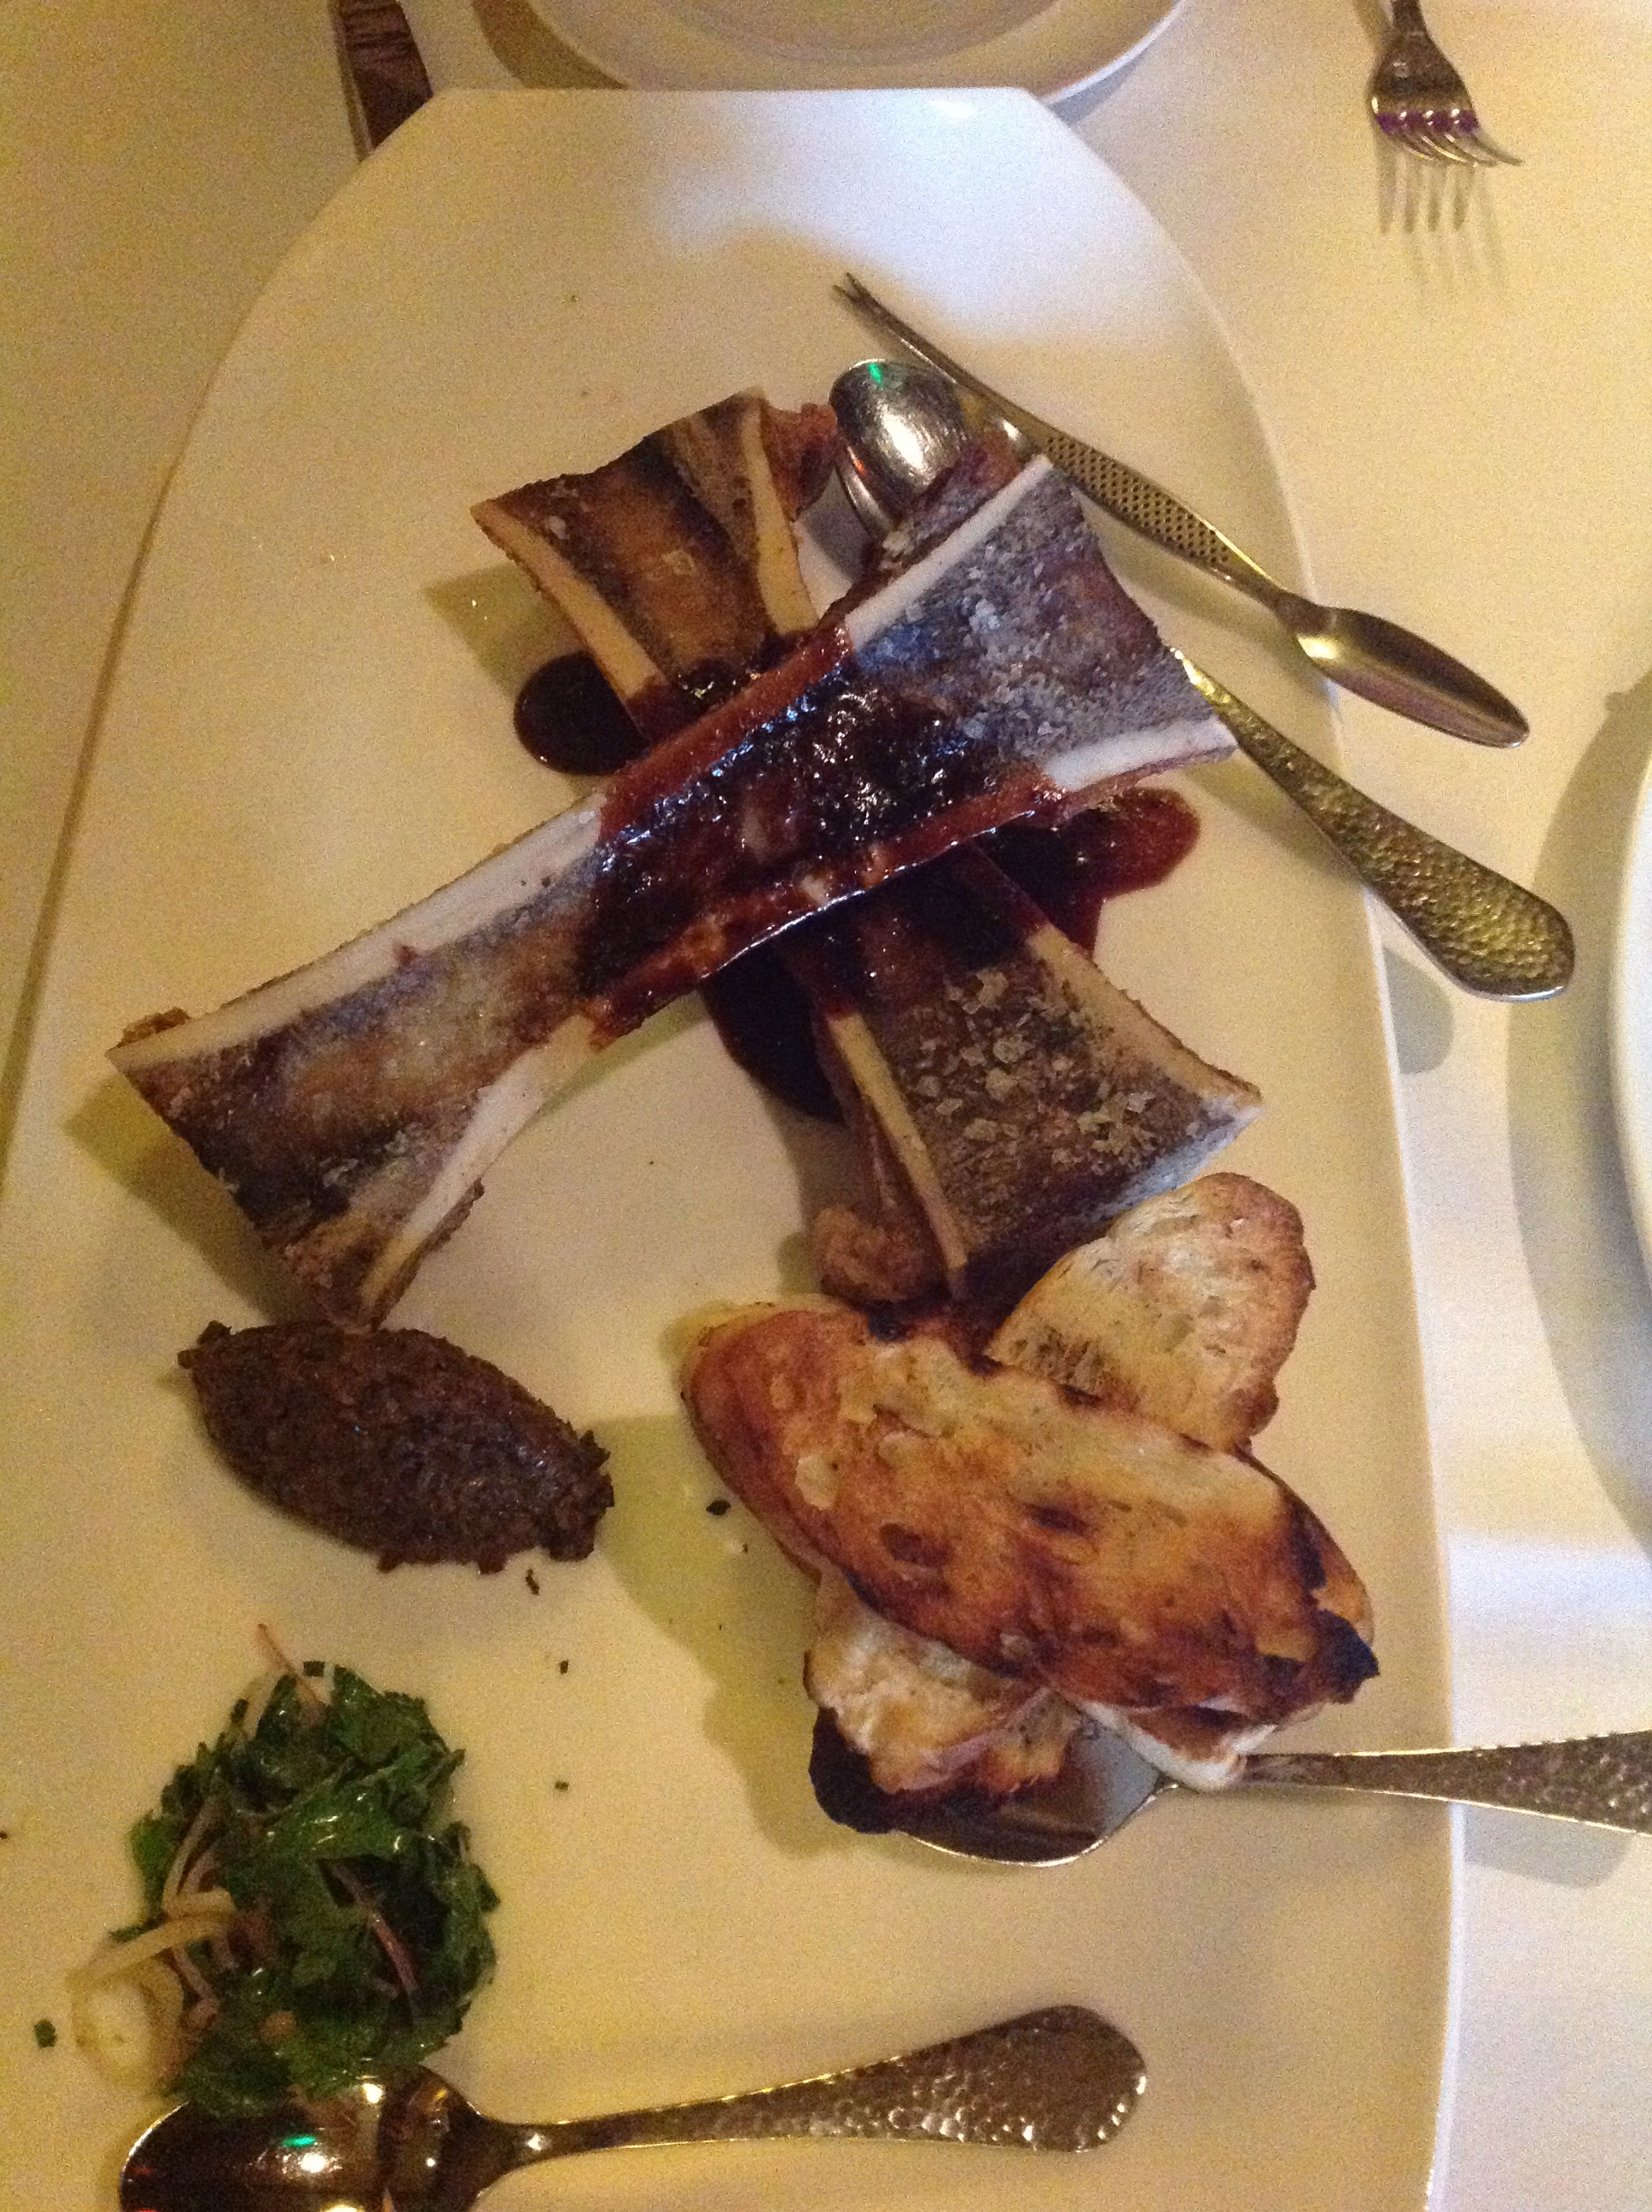 Roasted Bone Marrow!so rich and good but not the healthiest!